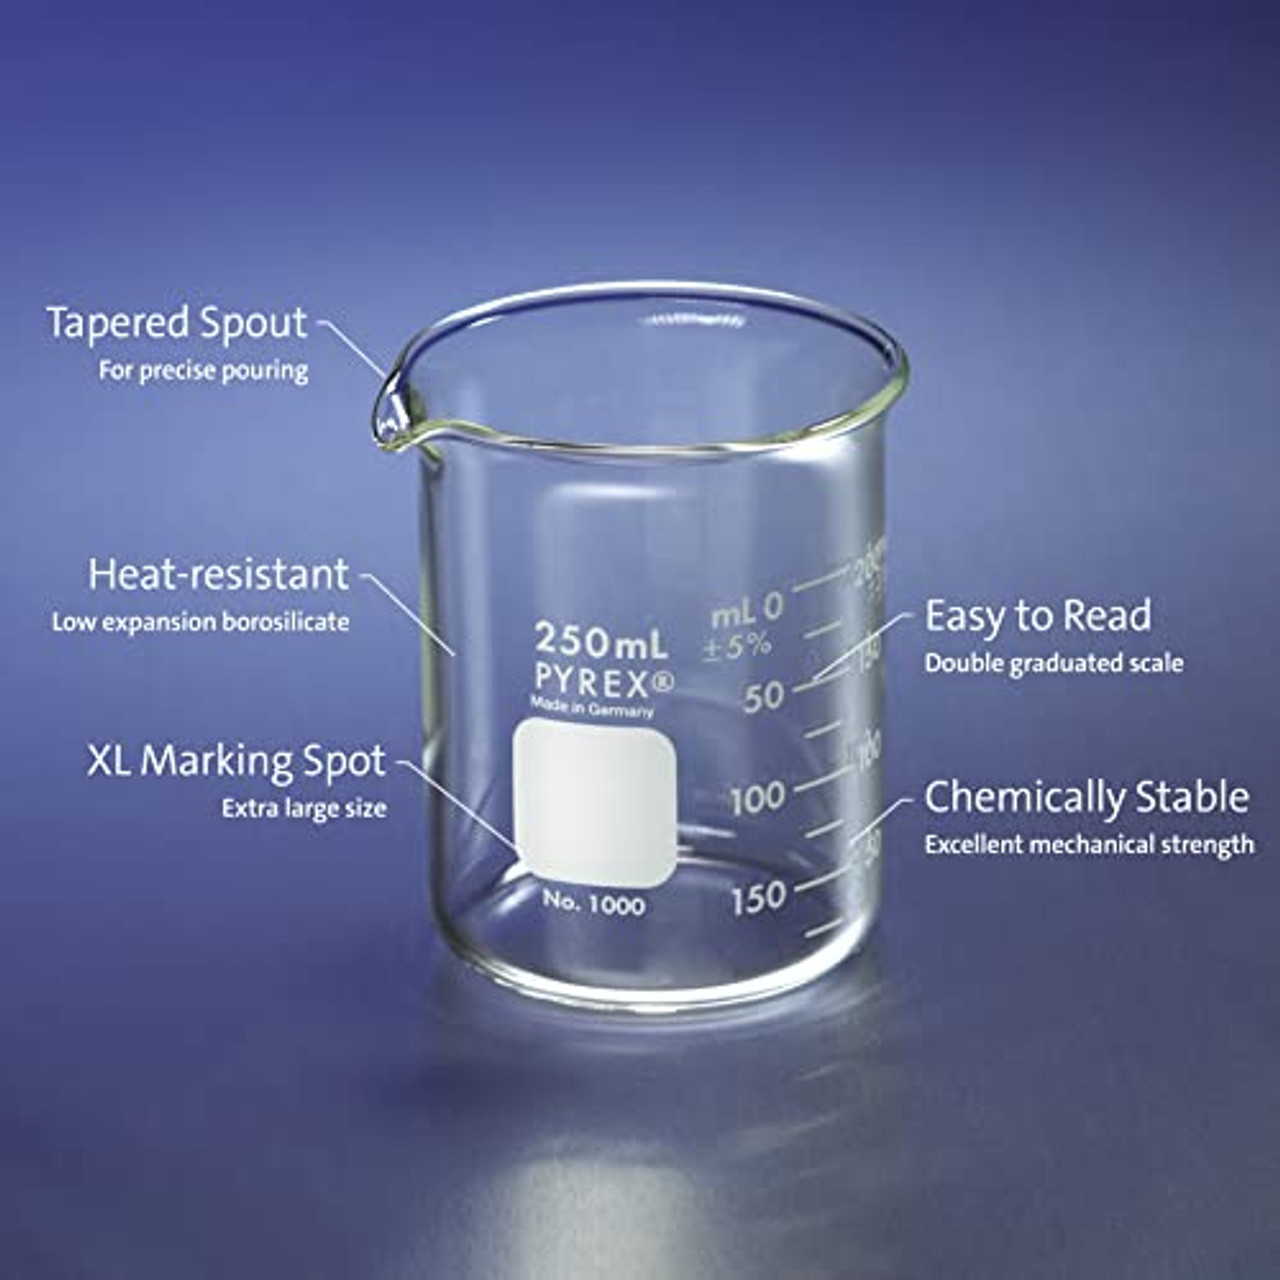 Why is Borosilicate Glass better than the Regular Glass?